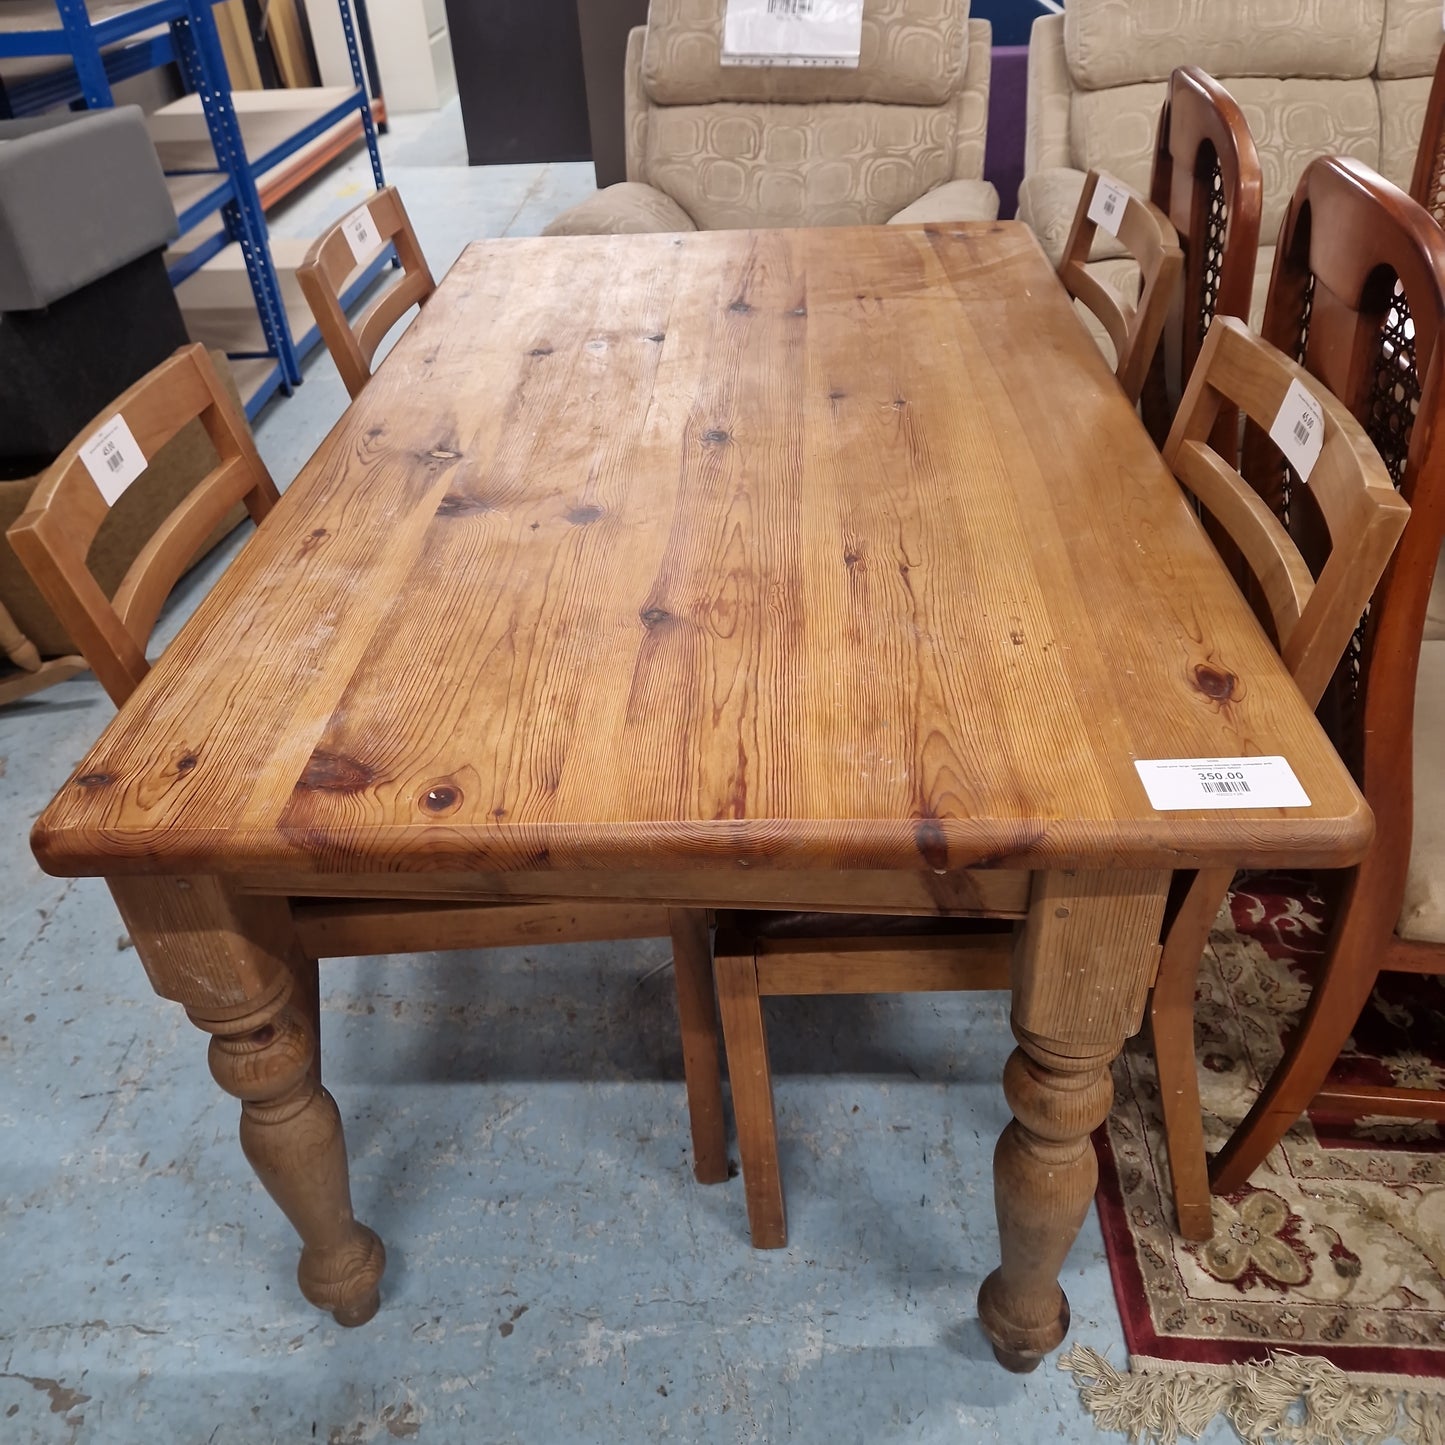 Solid pine large farmhouse kitchen table complete with matching chairs